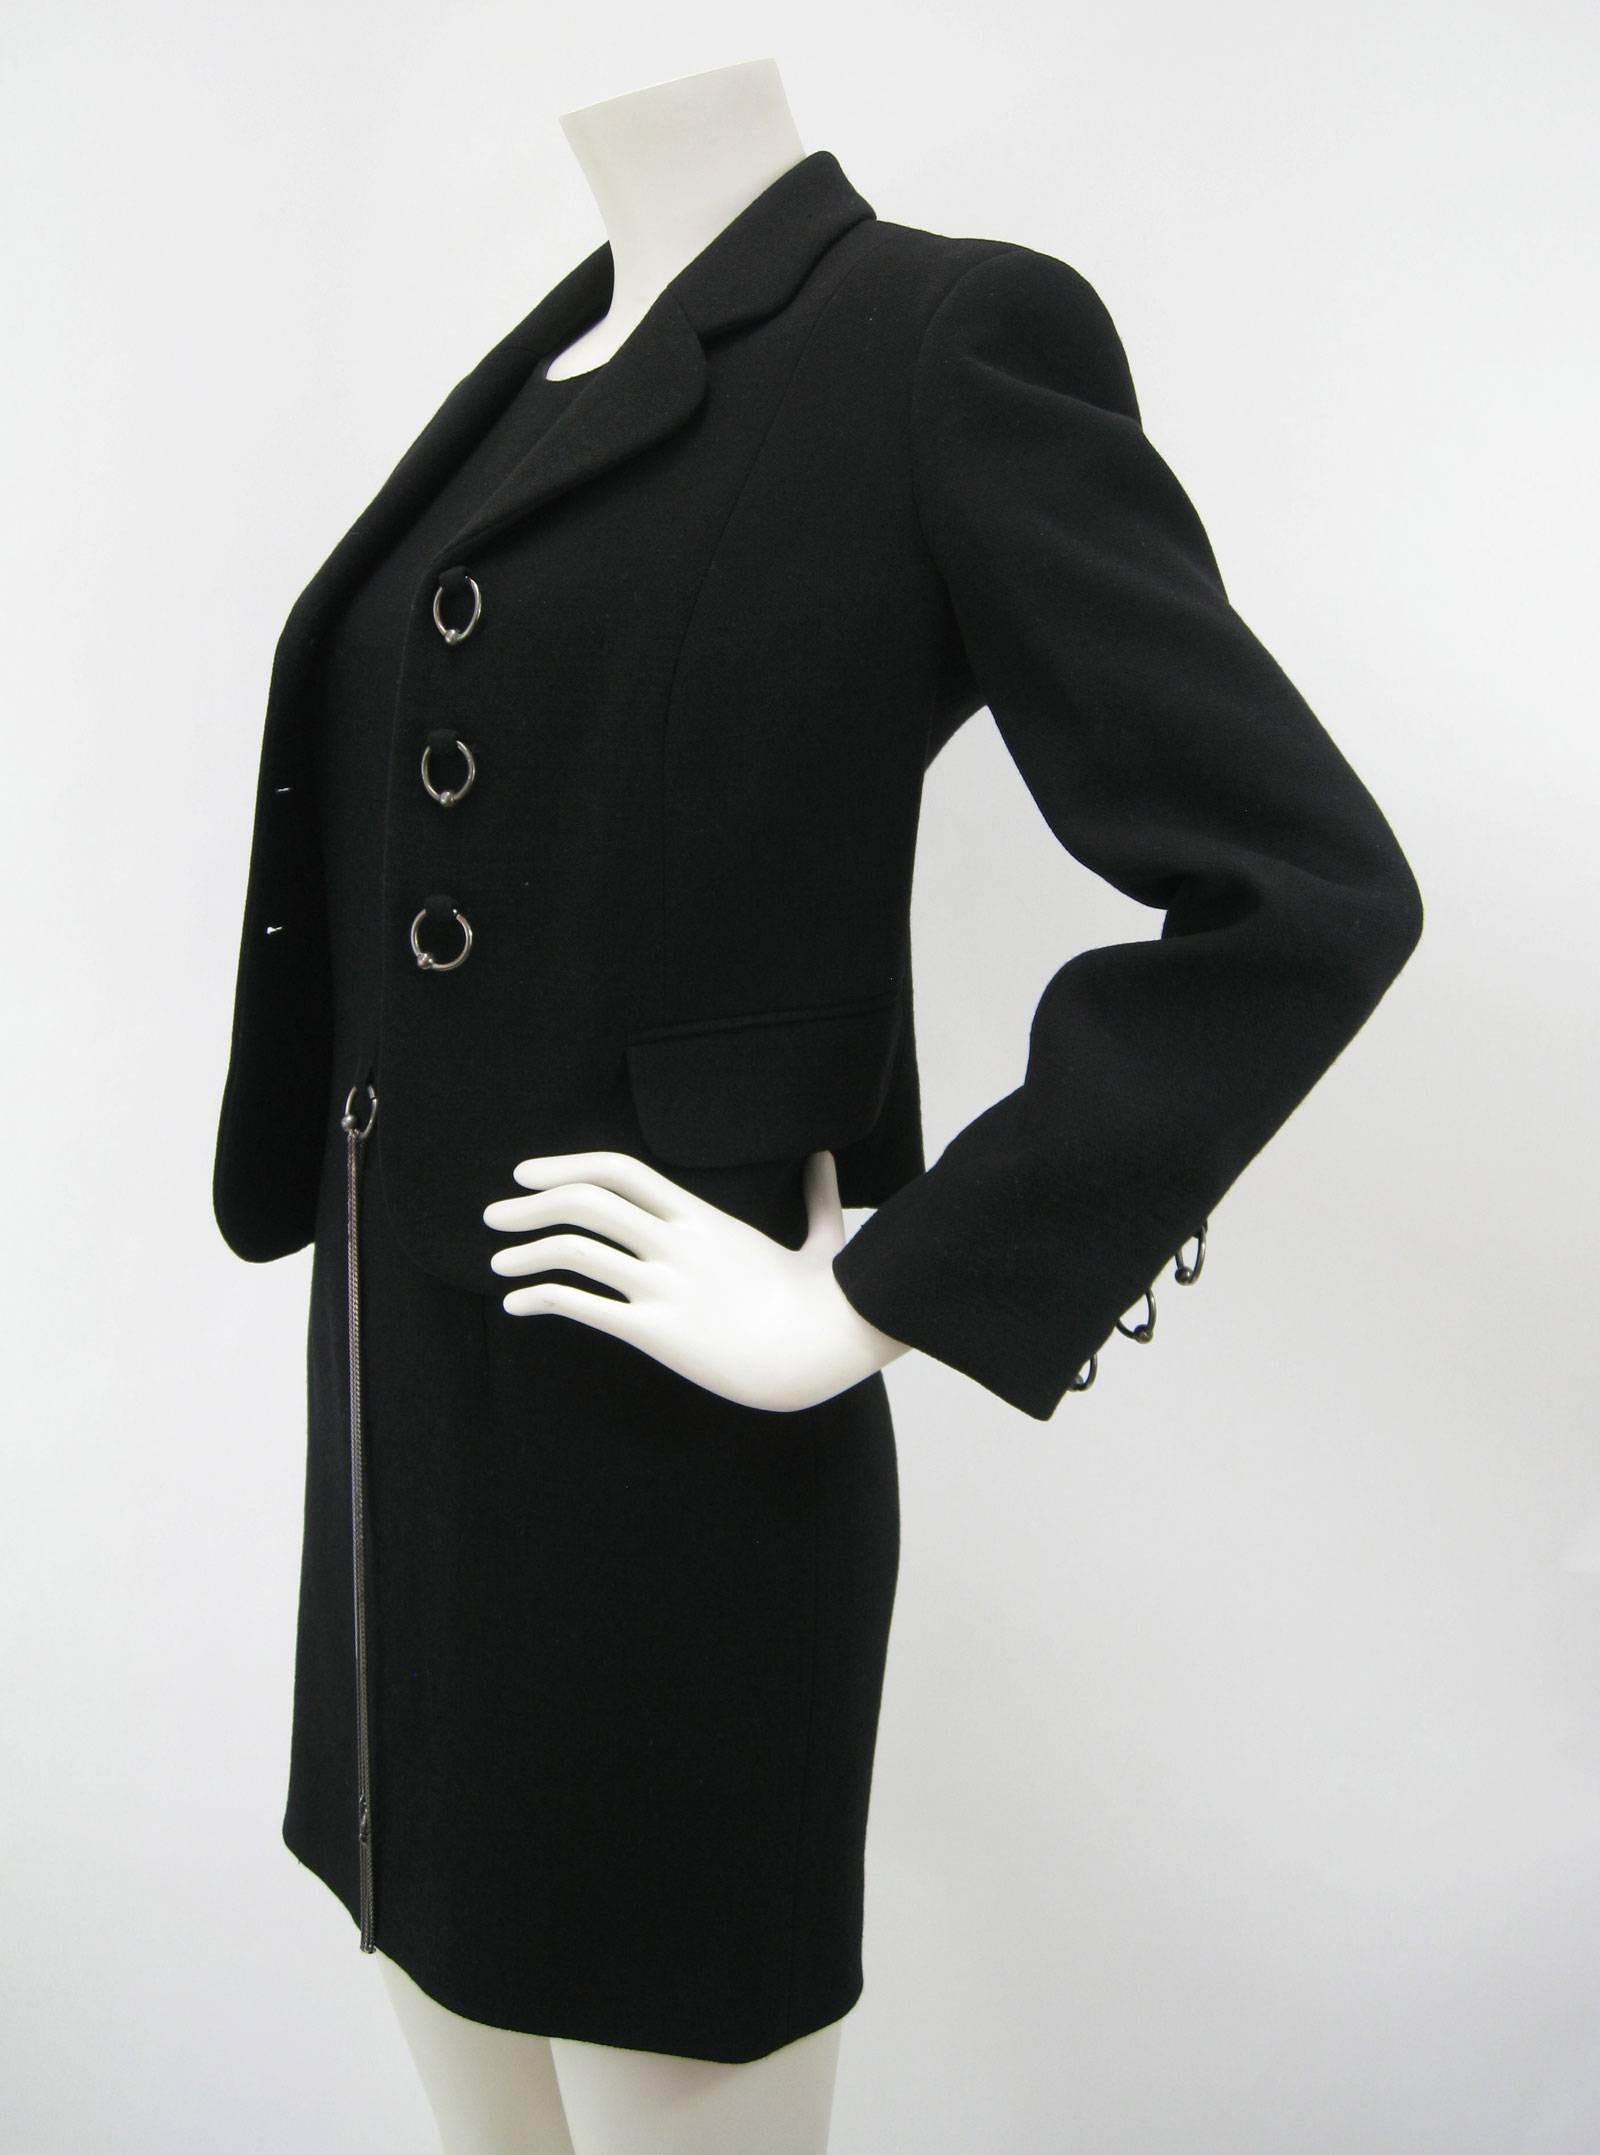 Vintage Moschino black dress and jacket suit.
Minimal black sleeveless dress with attached silver chain belt.
Back zipper. Fully lined.
Jacket hits at hip and features ring "buttons" (jacket unbuttoned in pics)
Front flap